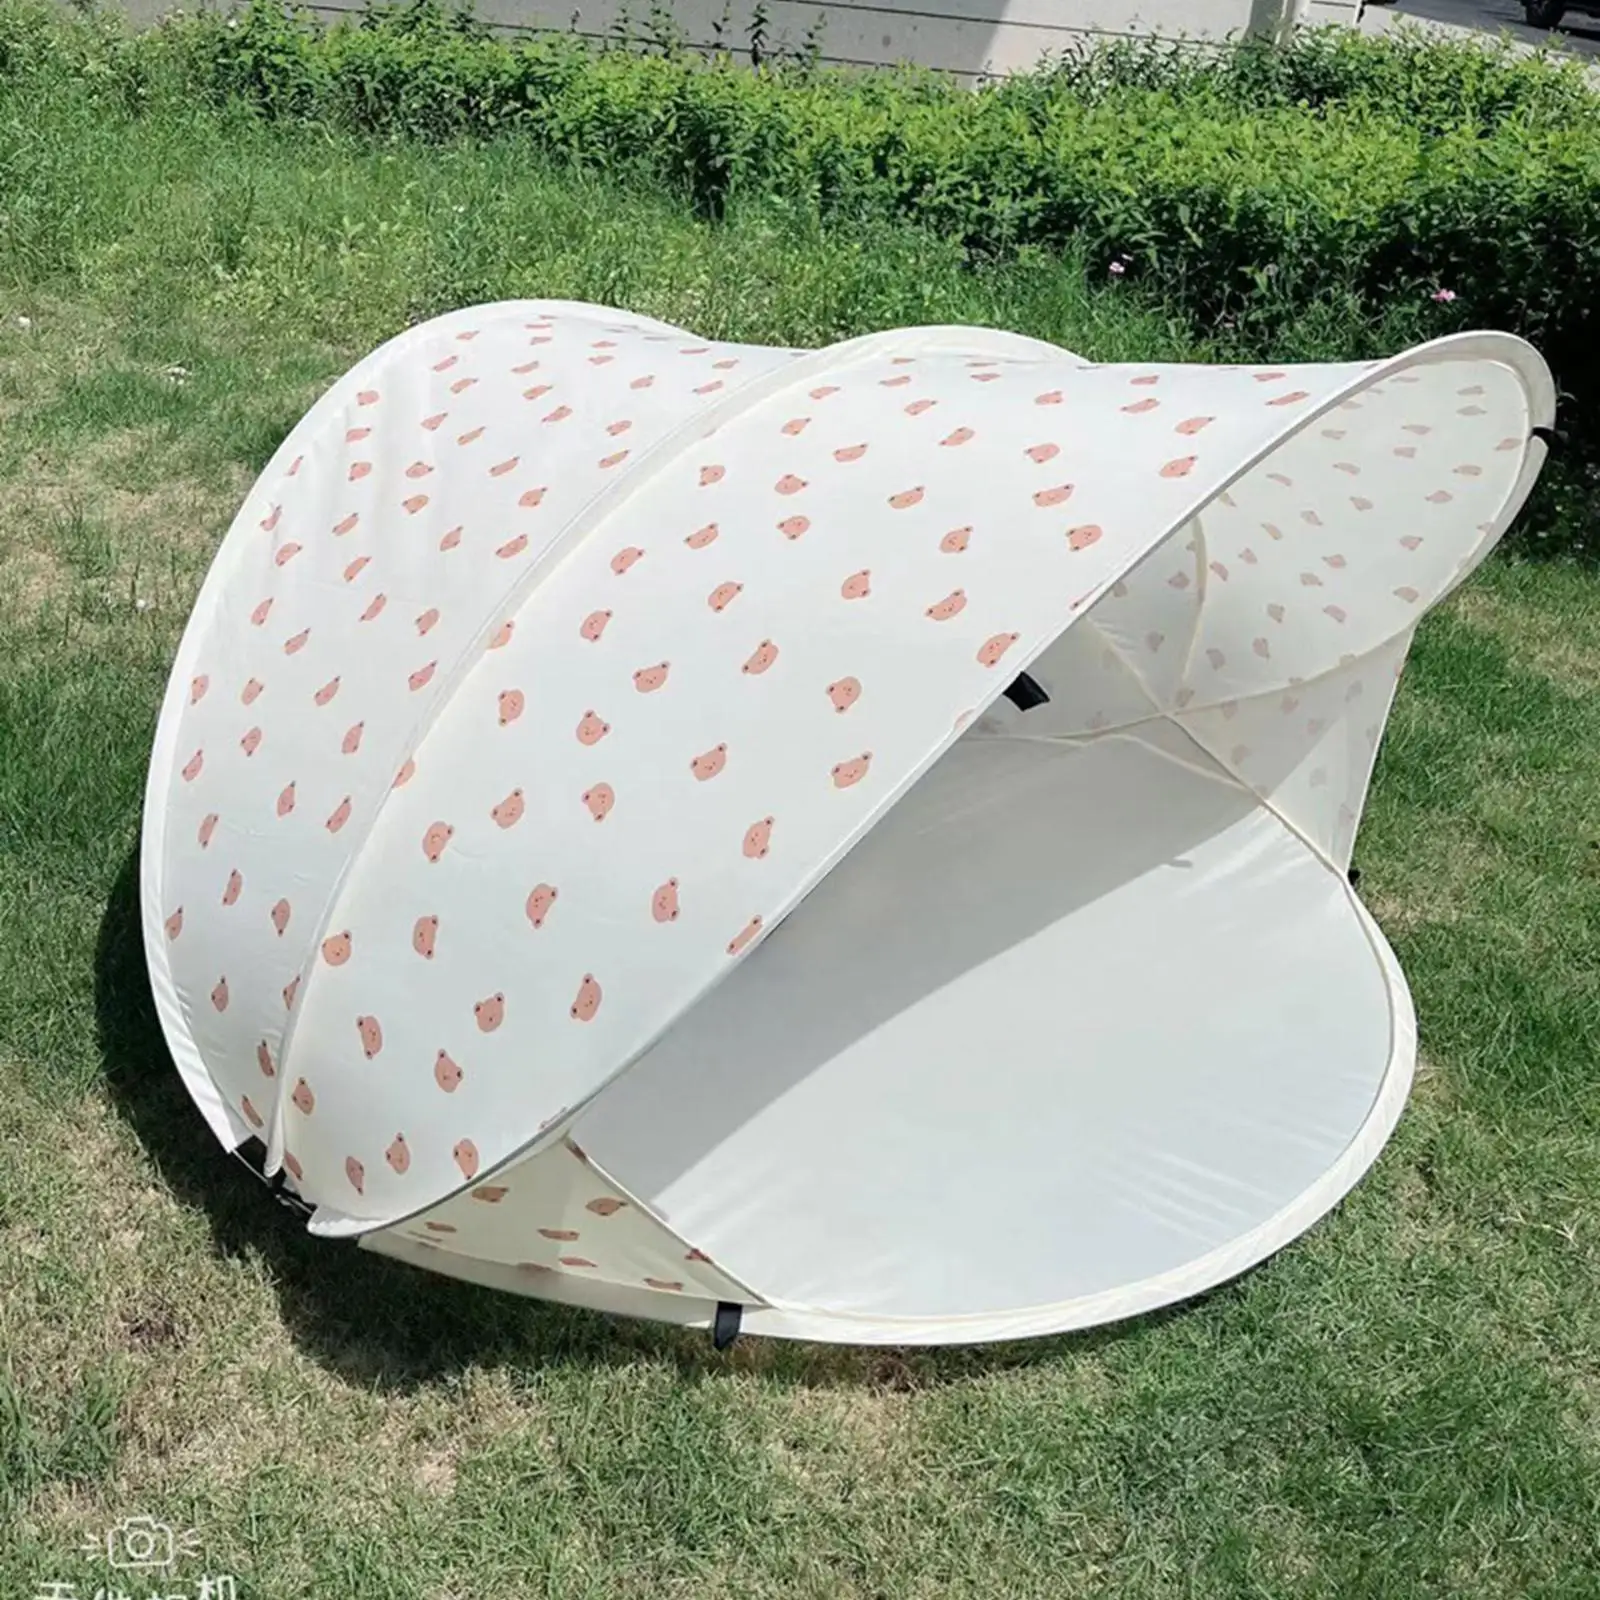 Baby Travel Tent Portable Foldable Beach Tent with Carry Bag Camping Playground for Children Boys Girls Backyard